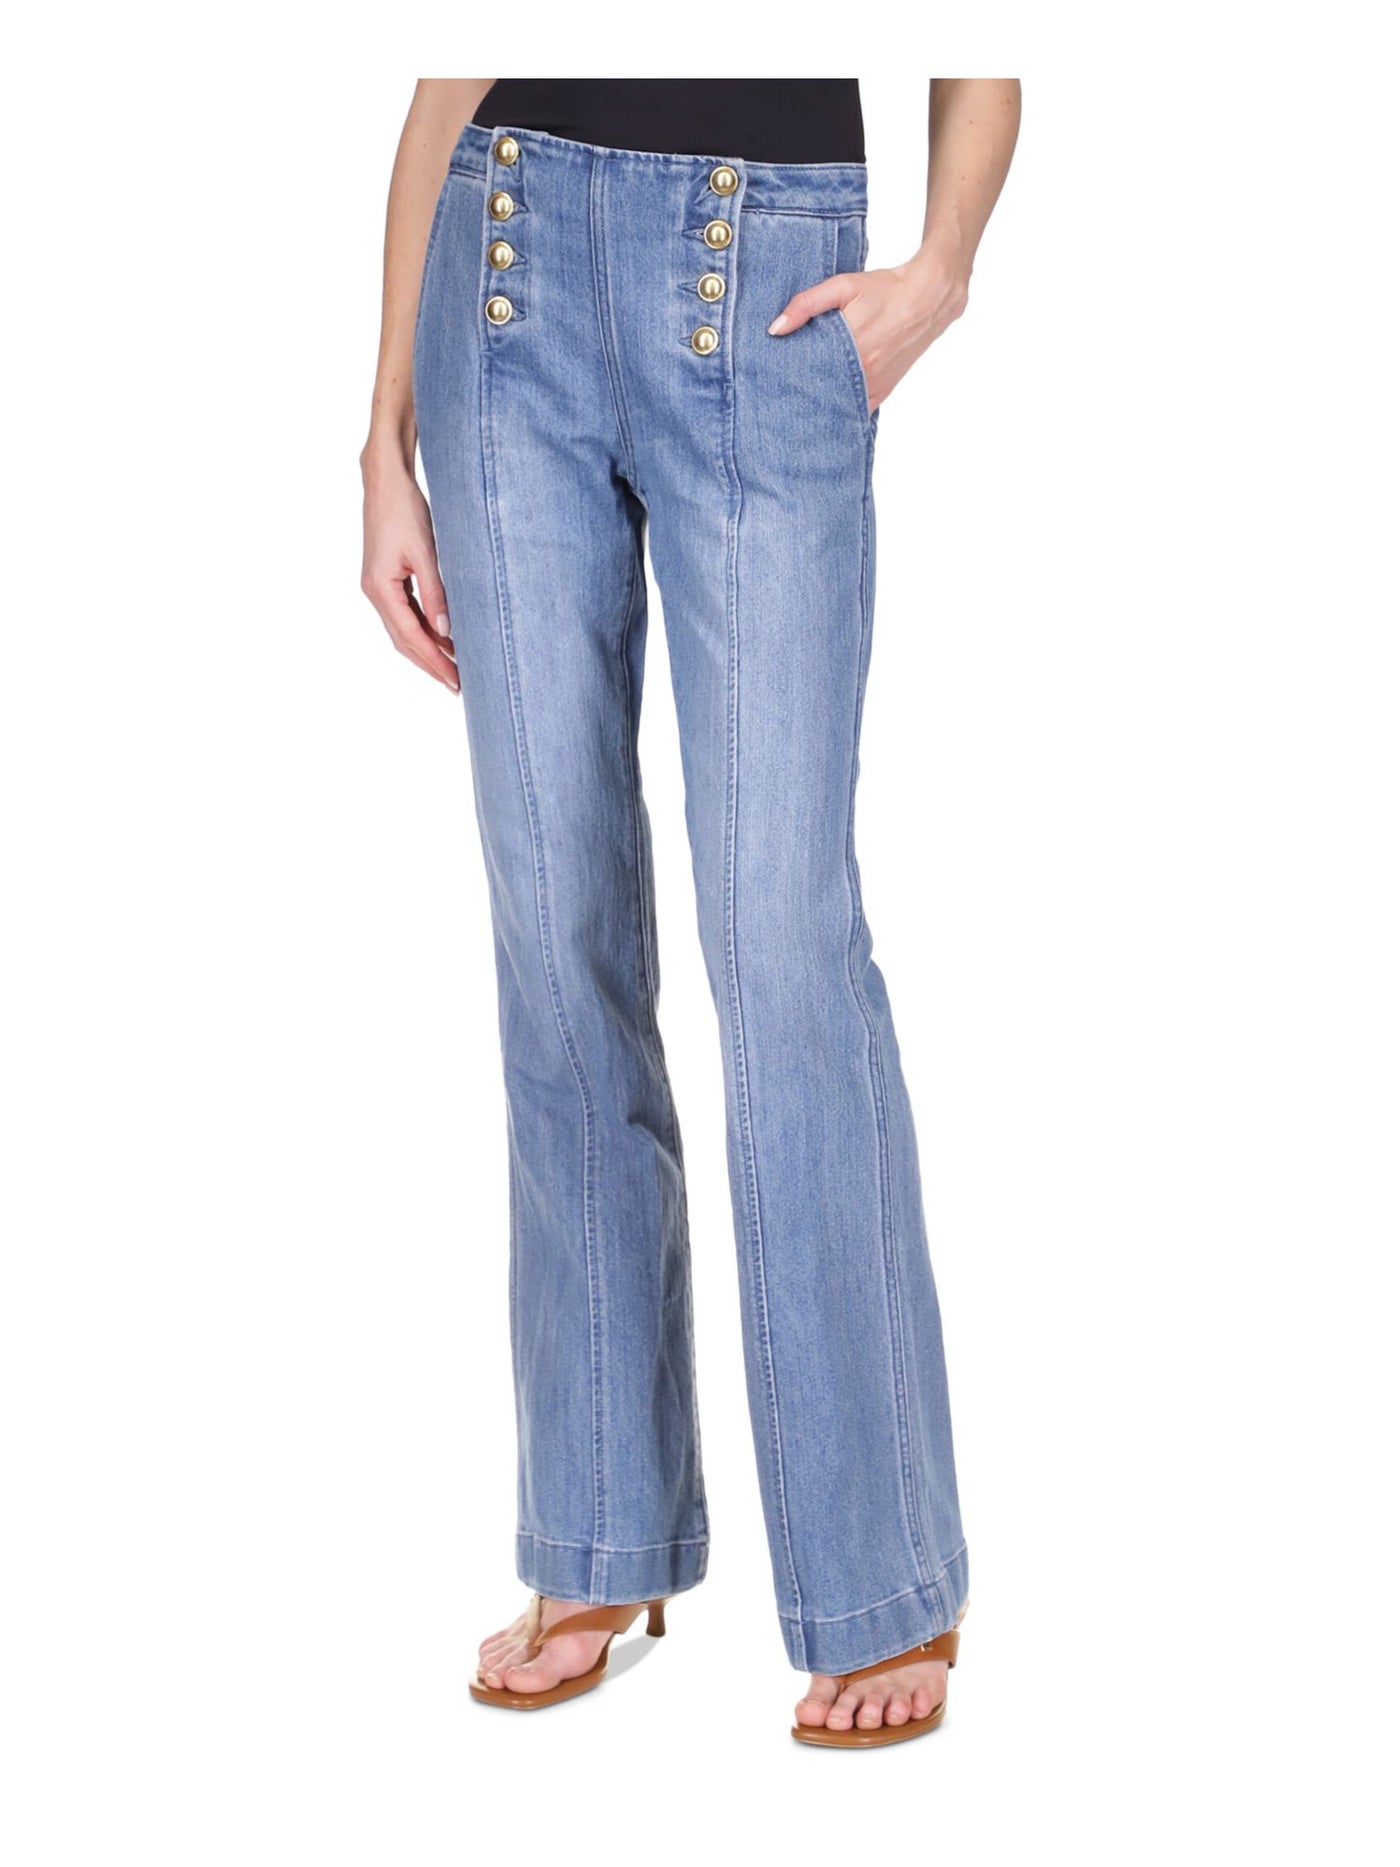 MICHAEL KORS Womens Blue Pocketed Double Button Closure Sailor Flare Jeans 10